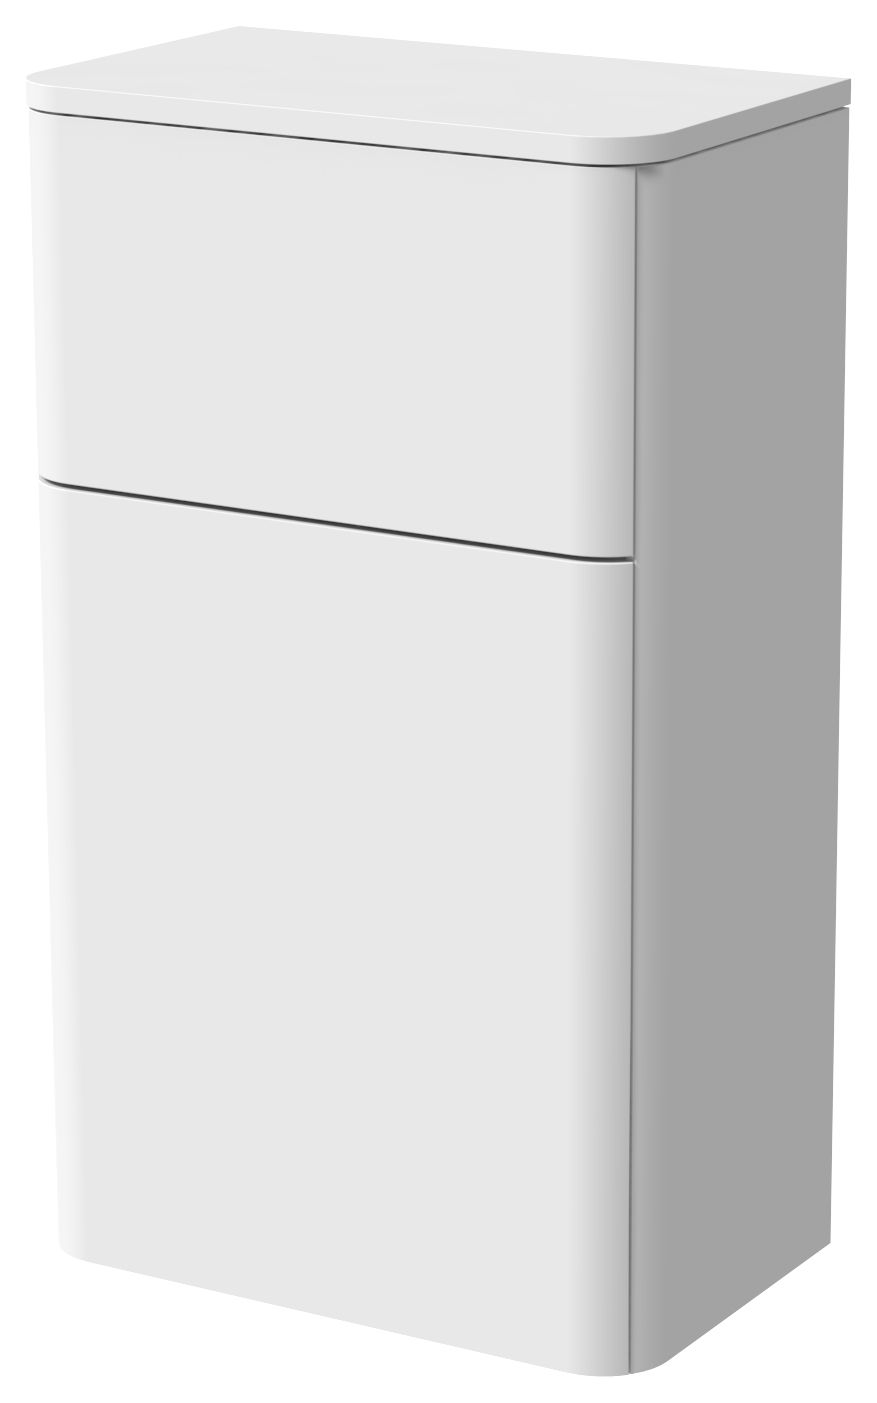 Image of Wickes Malmo Gloss White Freestanding Toilet Unit - 832 x 500mm